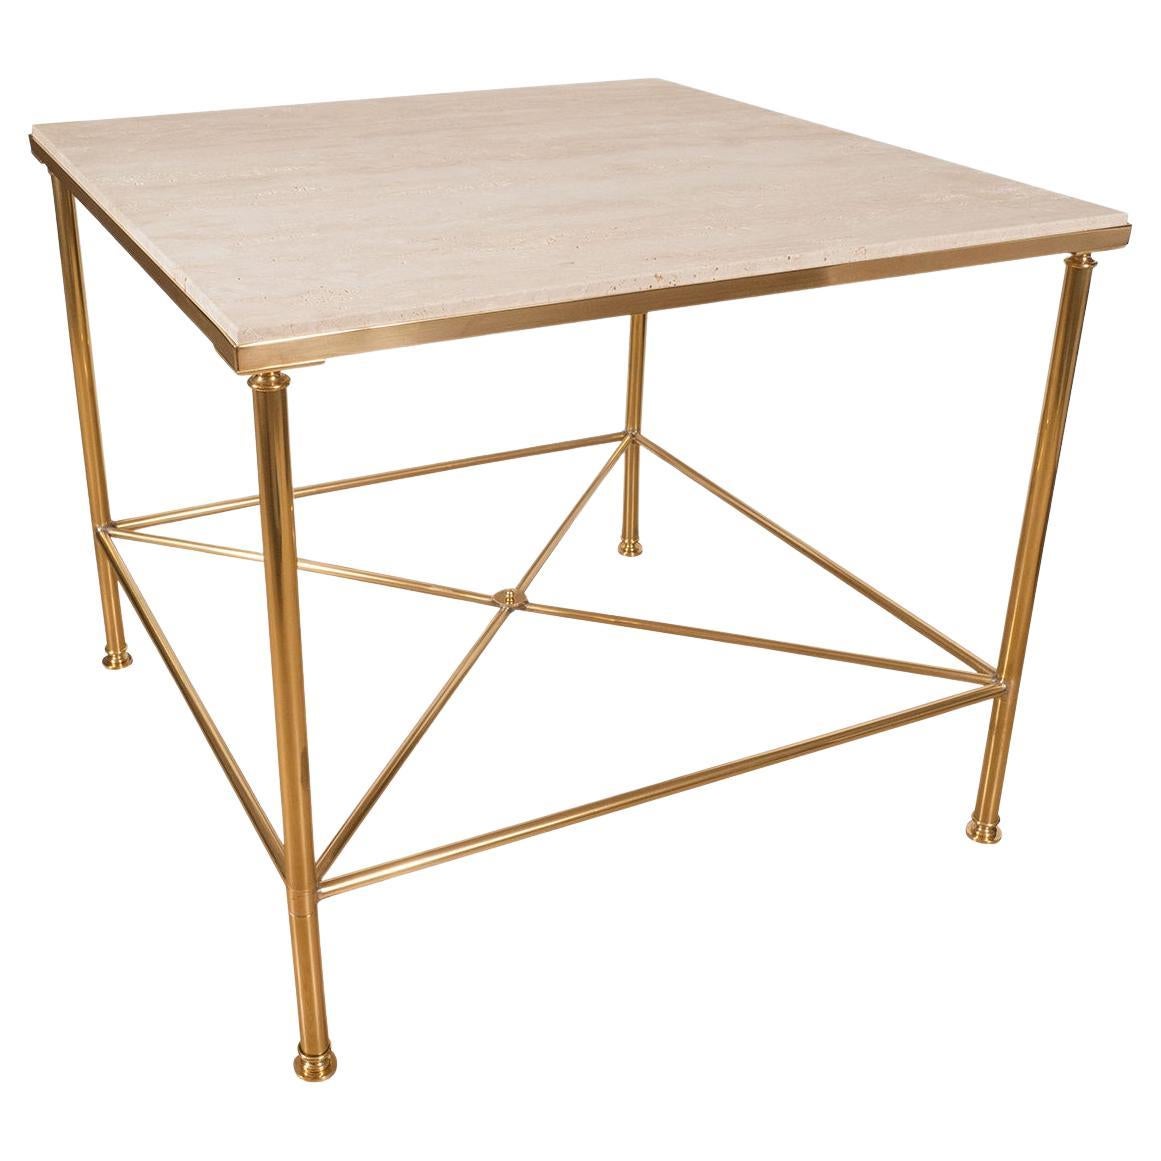 Pair of brass side tables with travertine tops